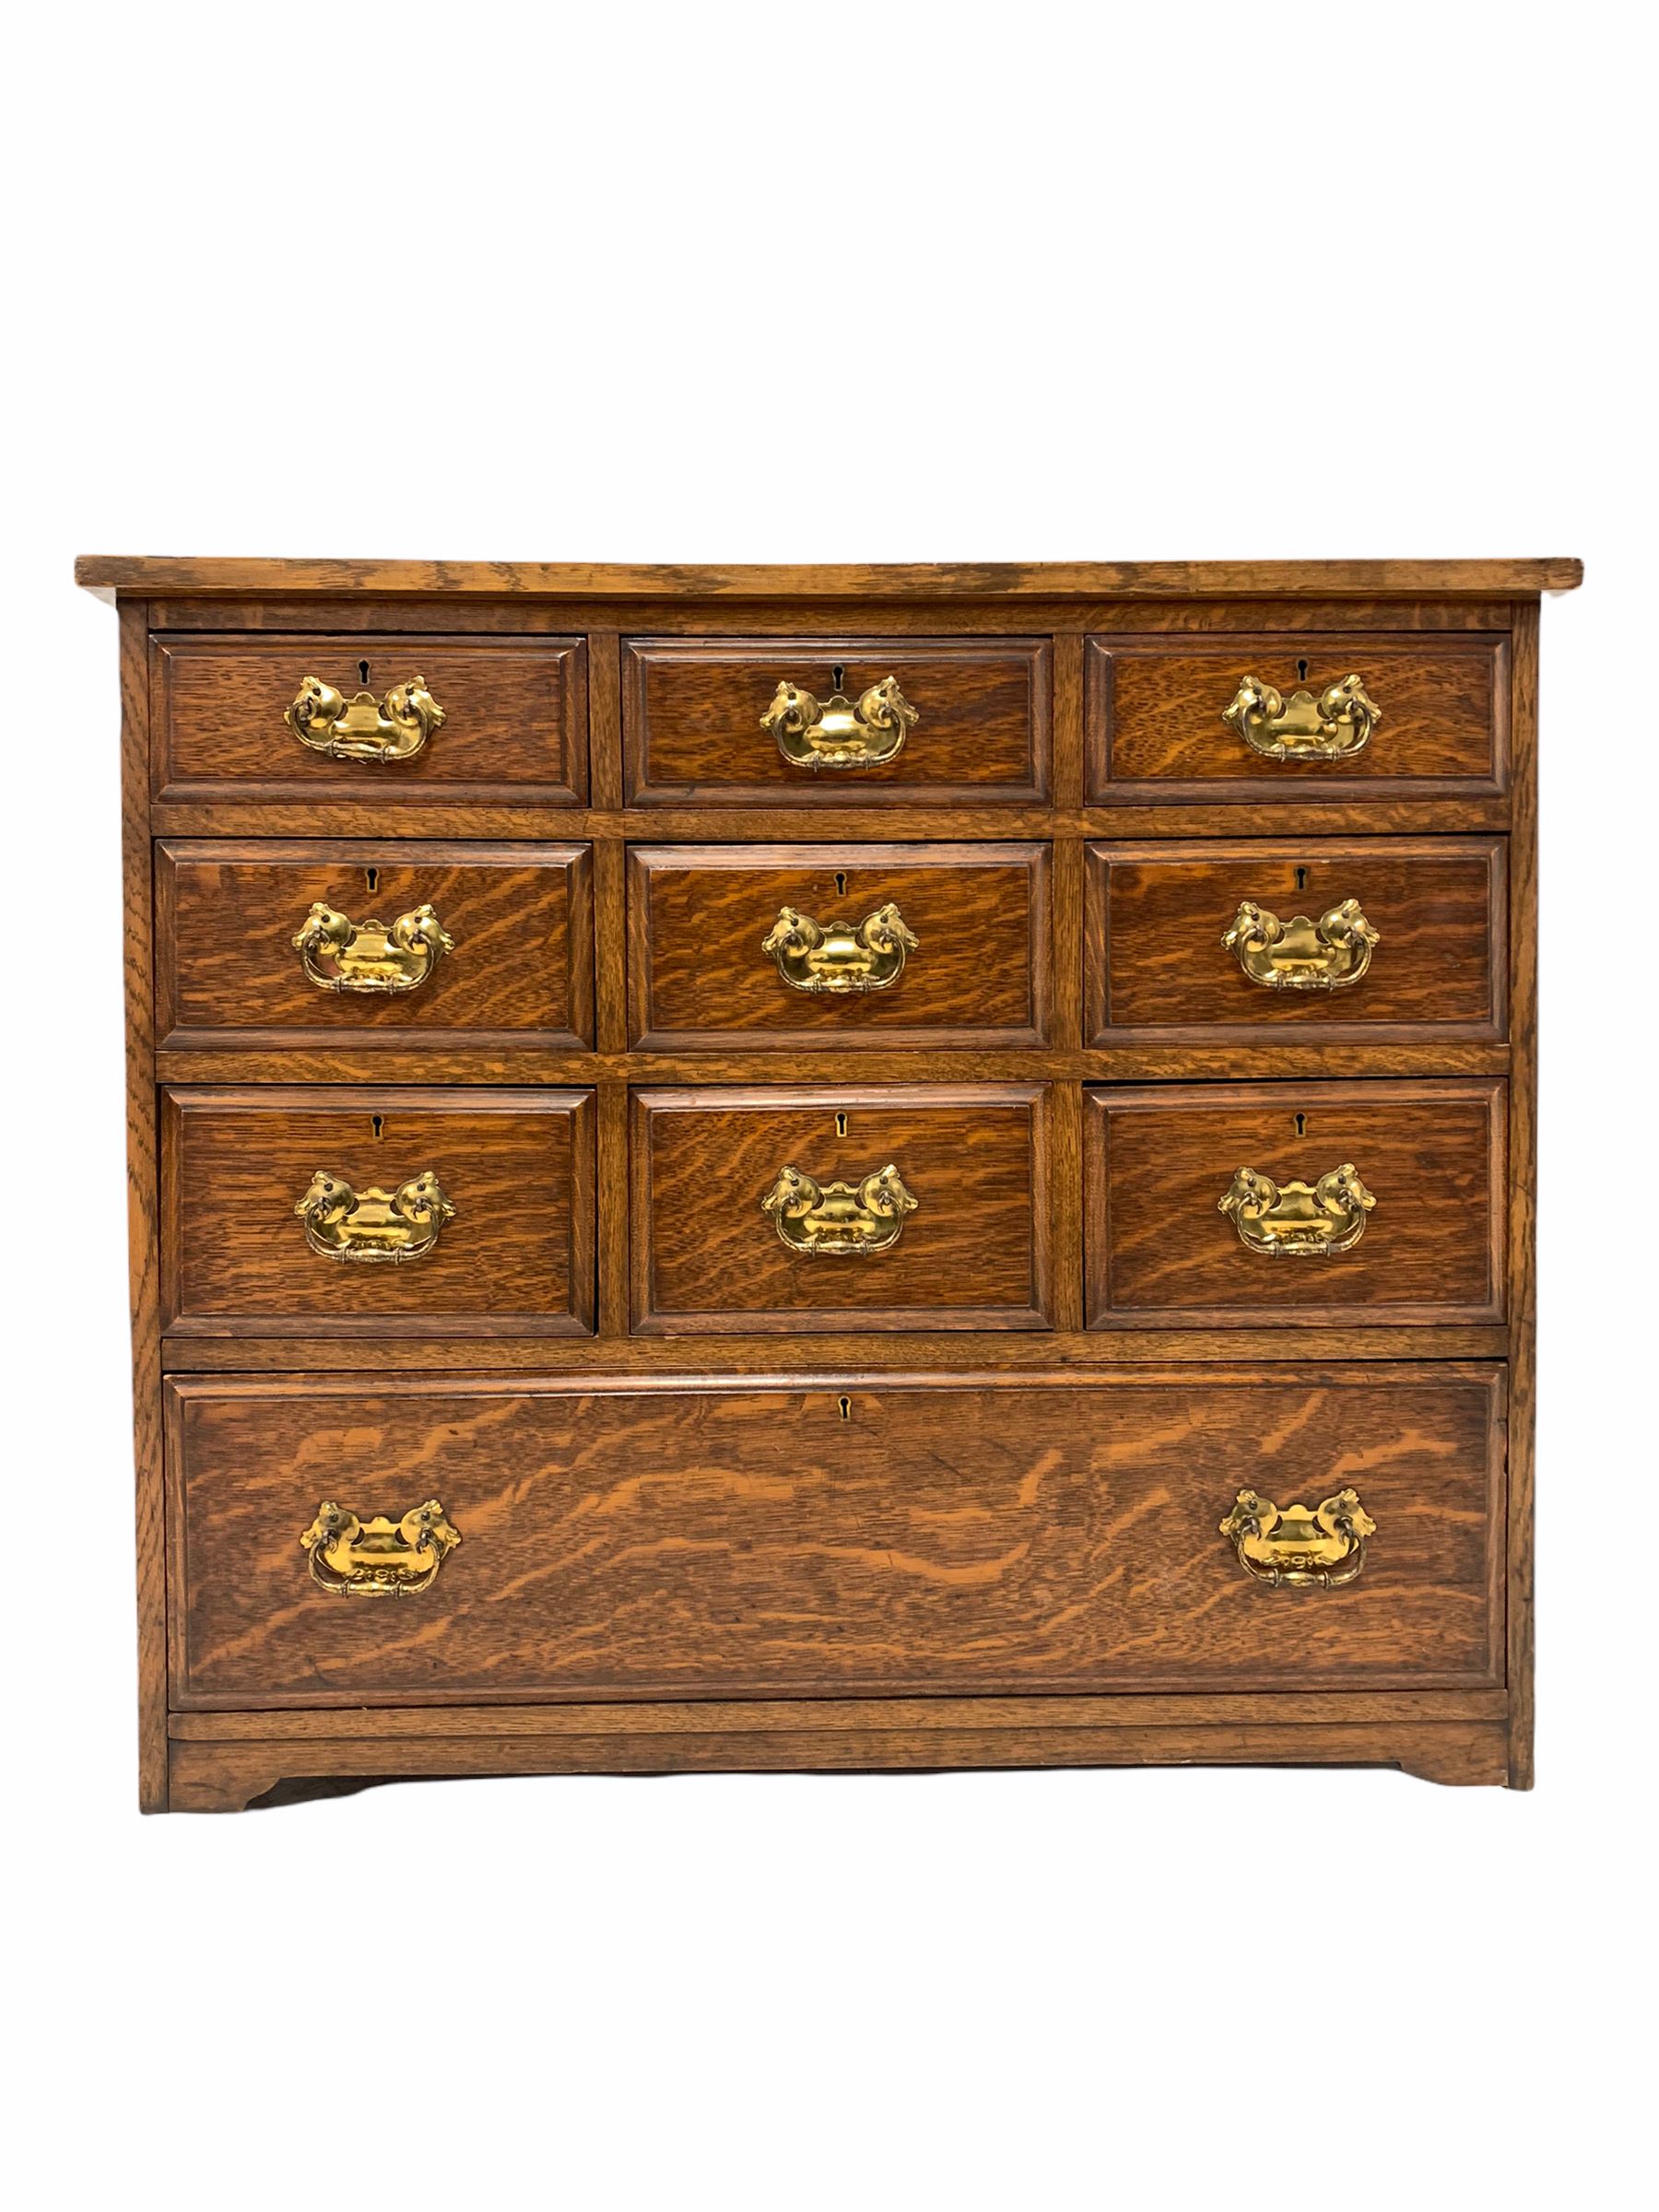 18th century style oak chest of drawers - Image 2 of 2